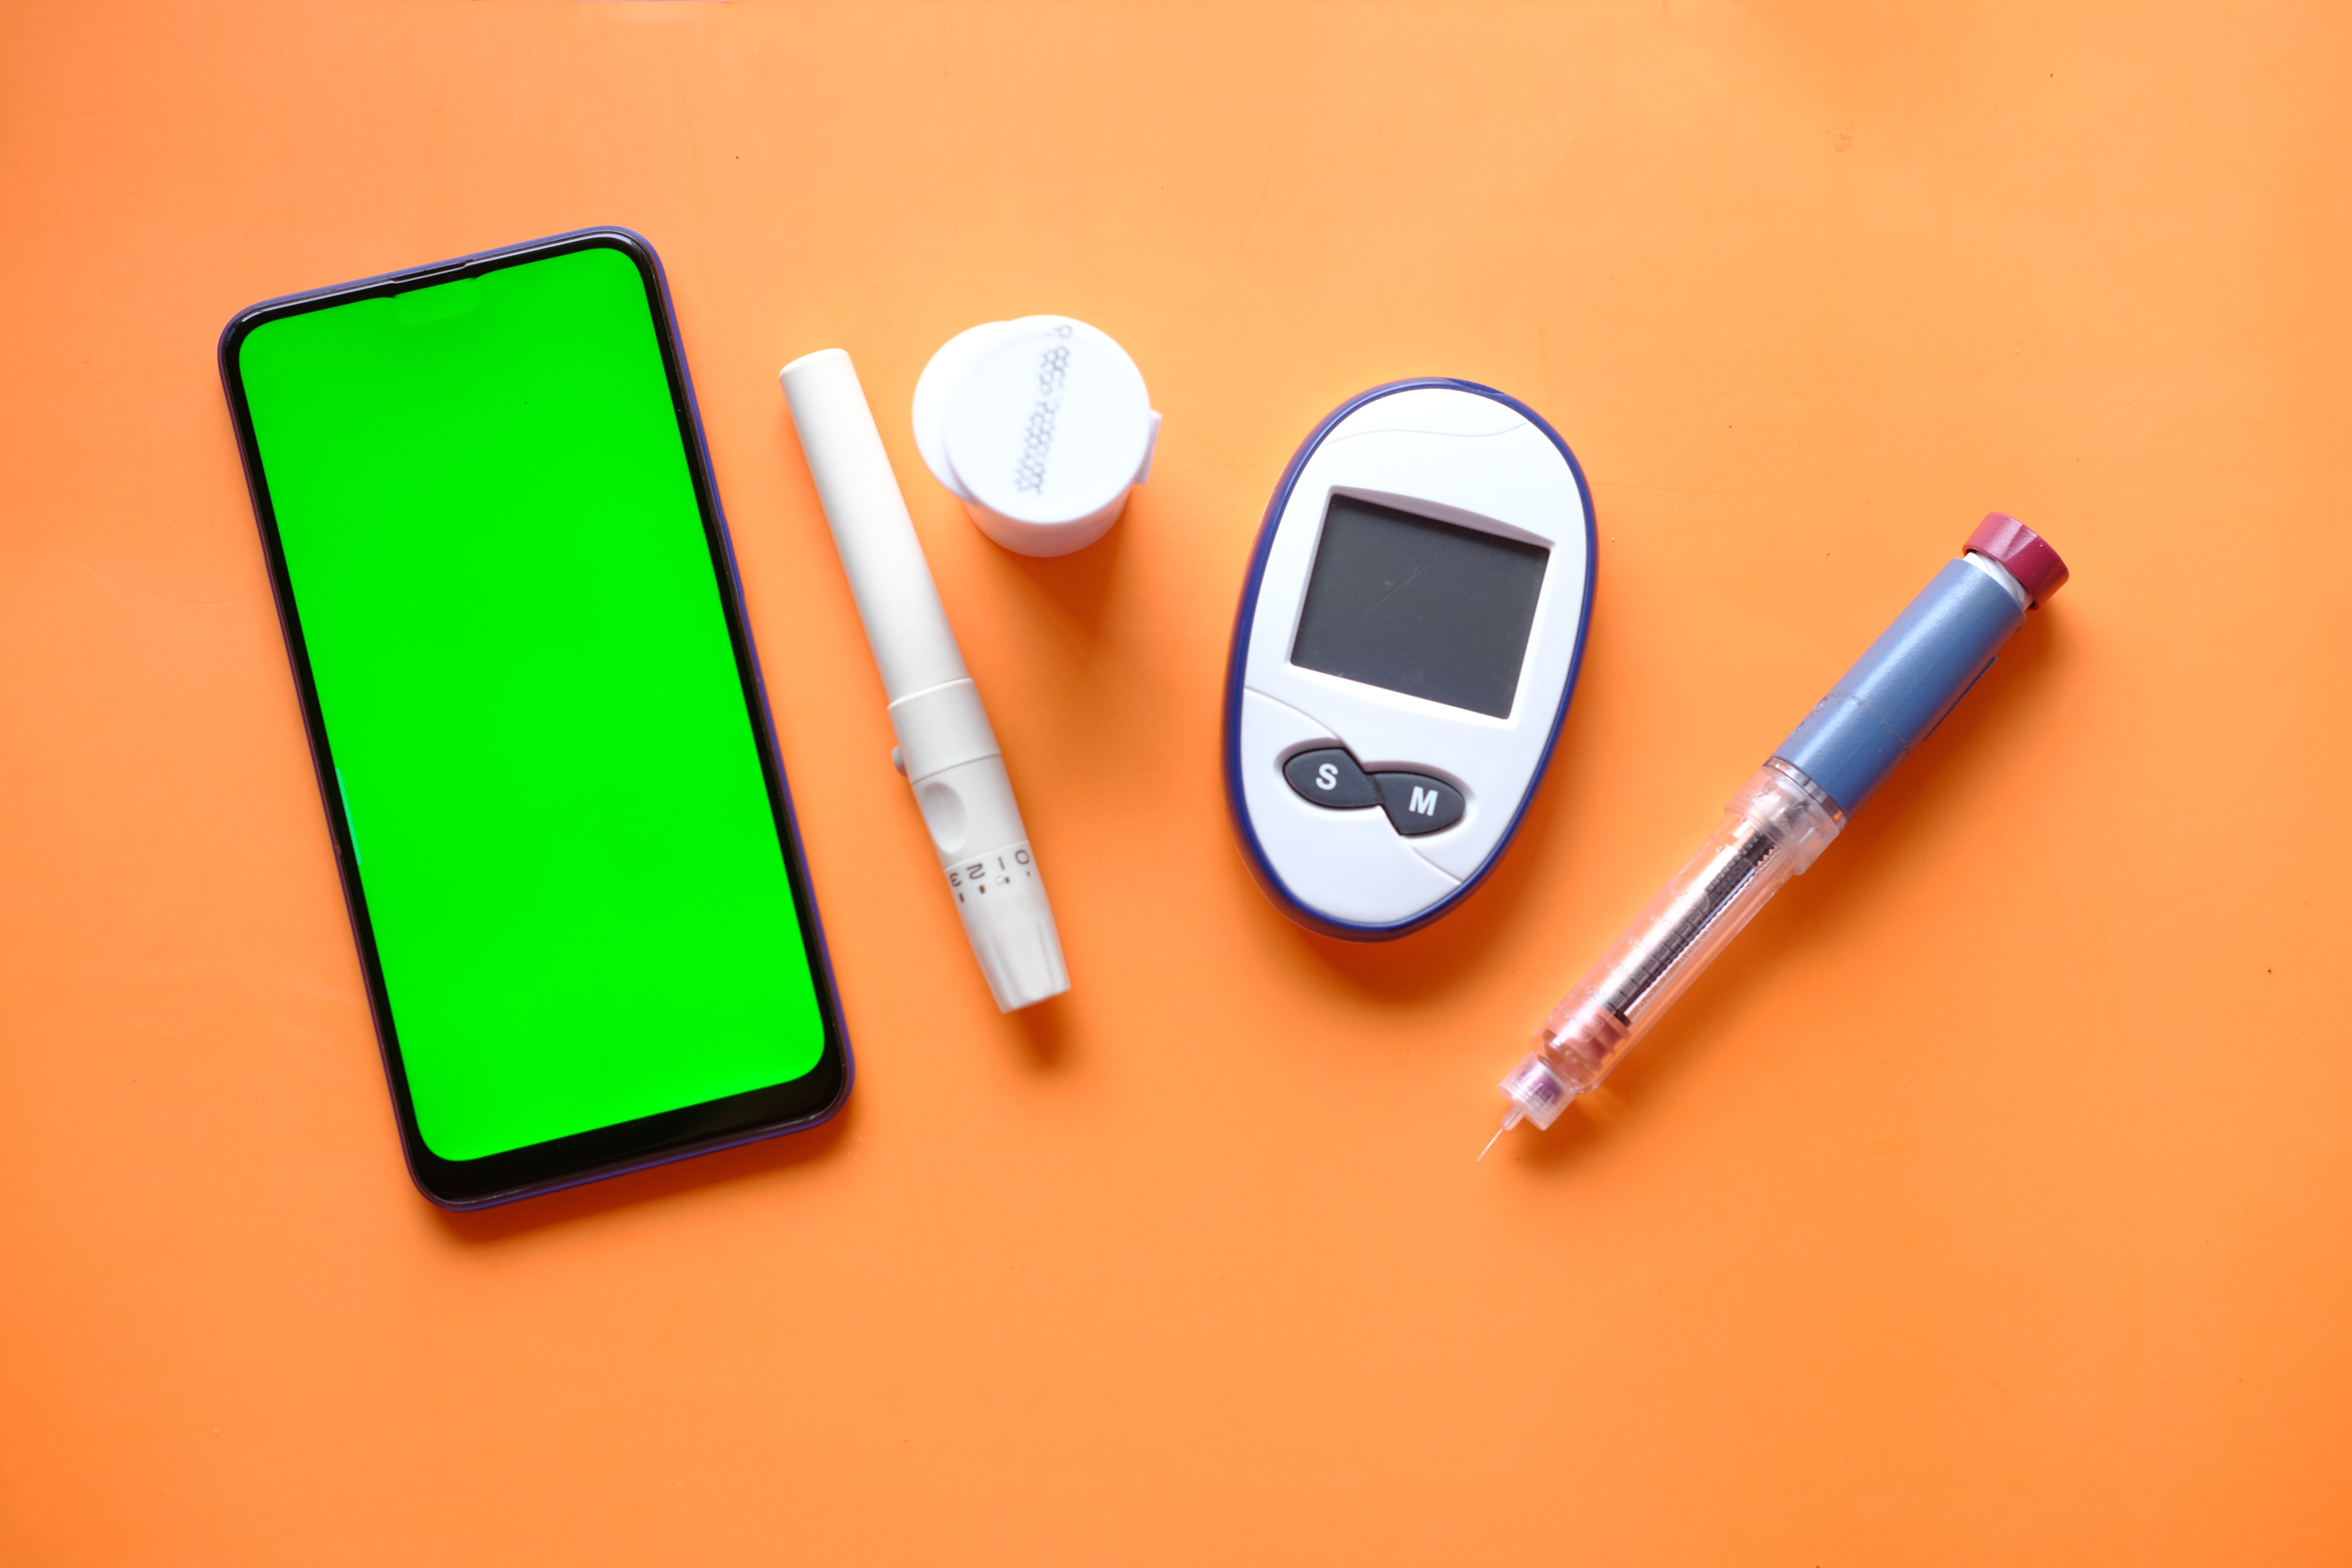 insulin pen, diabetic measurement tools an smart phone with empty space on table